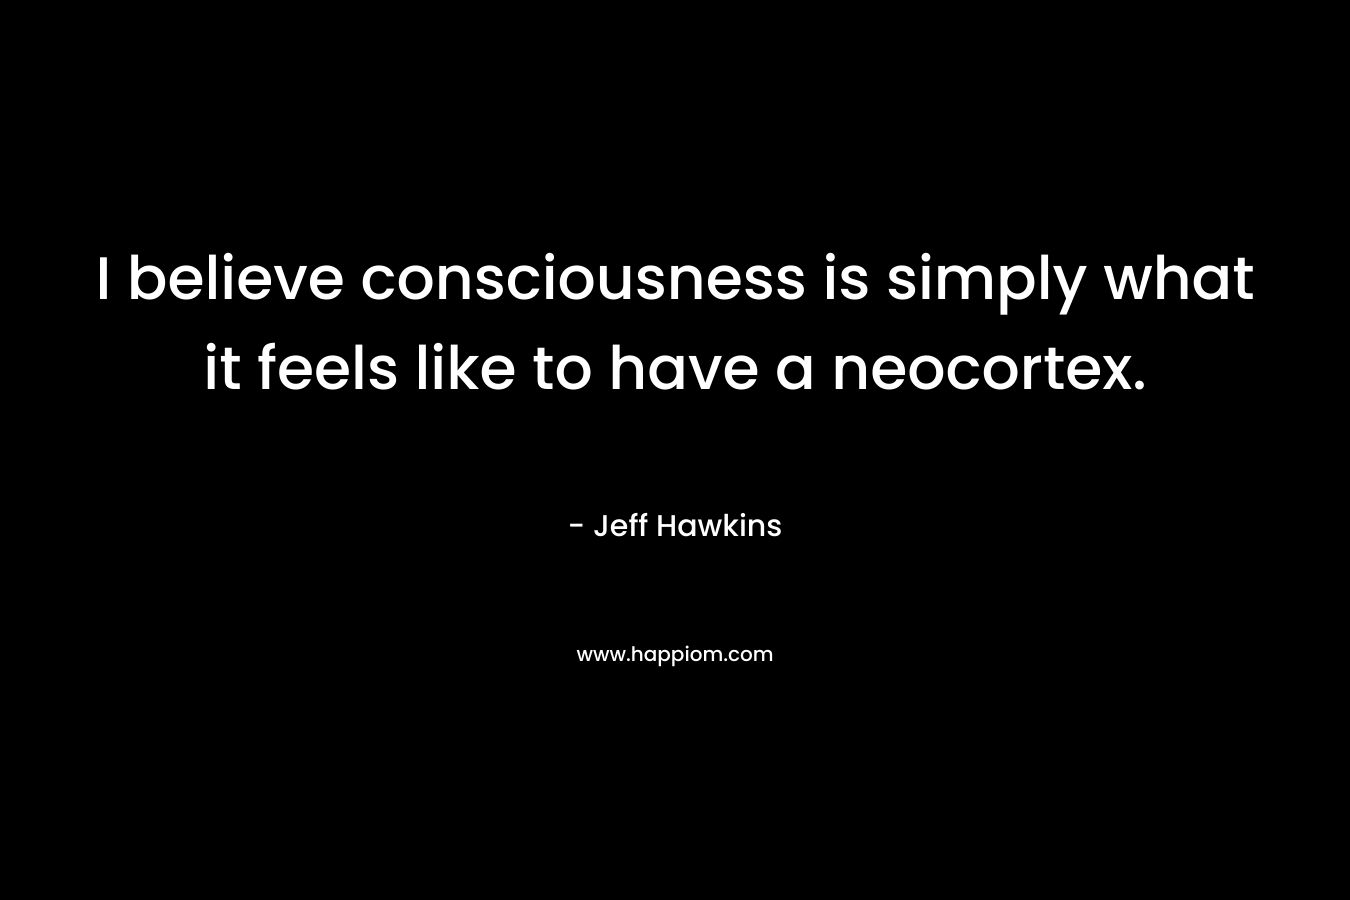 I believe consciousness is simply what it feels like to have a neocortex.